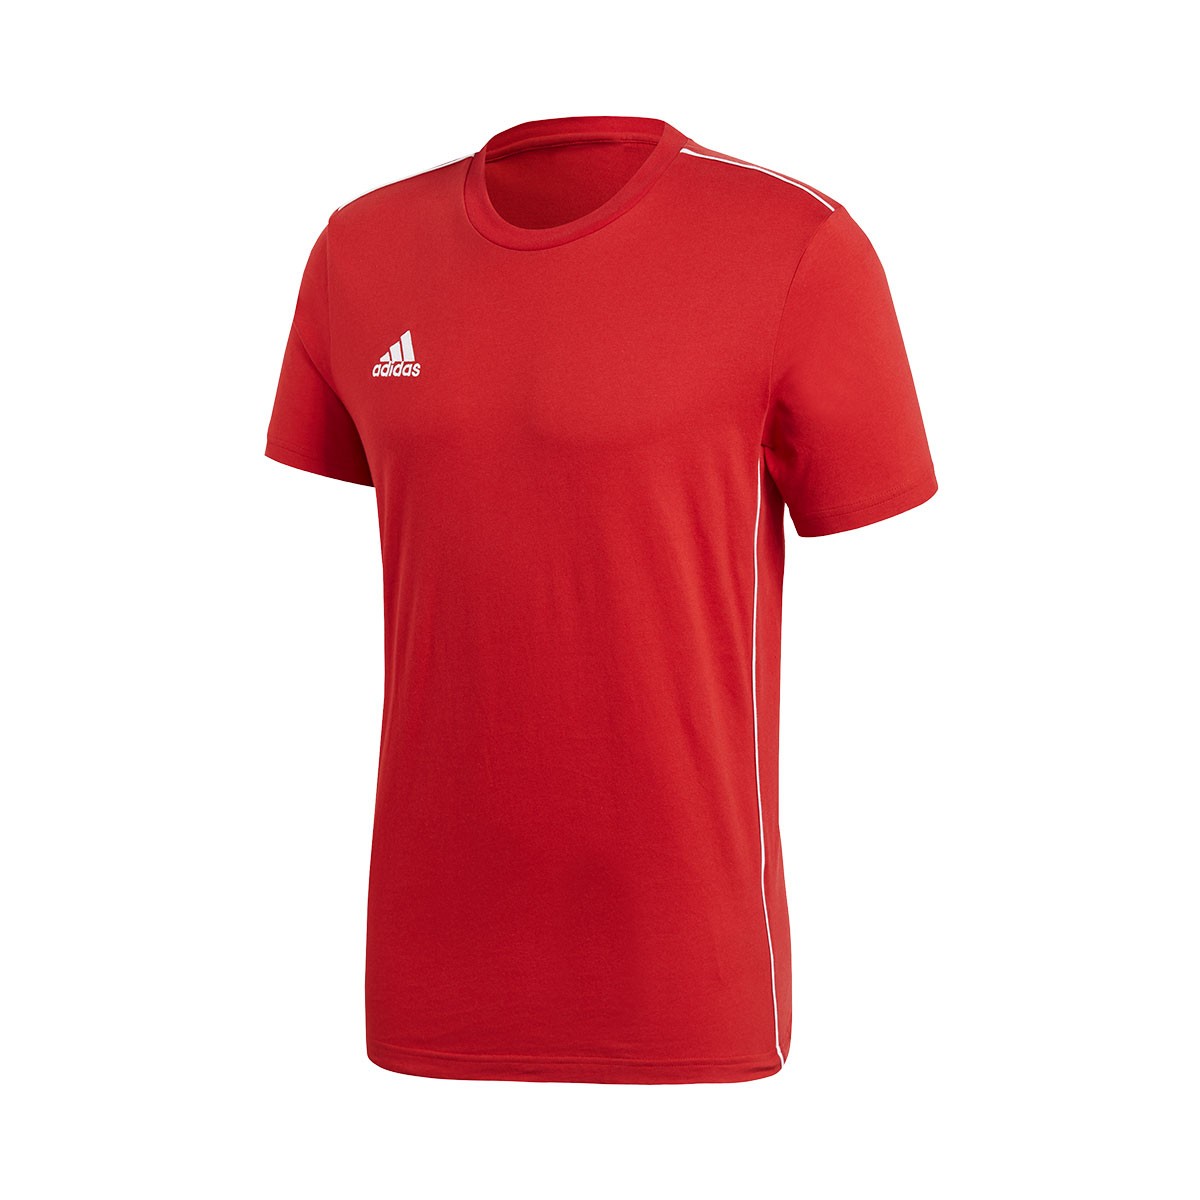 Jersey adidas Core 18 Tee m/c Power red 